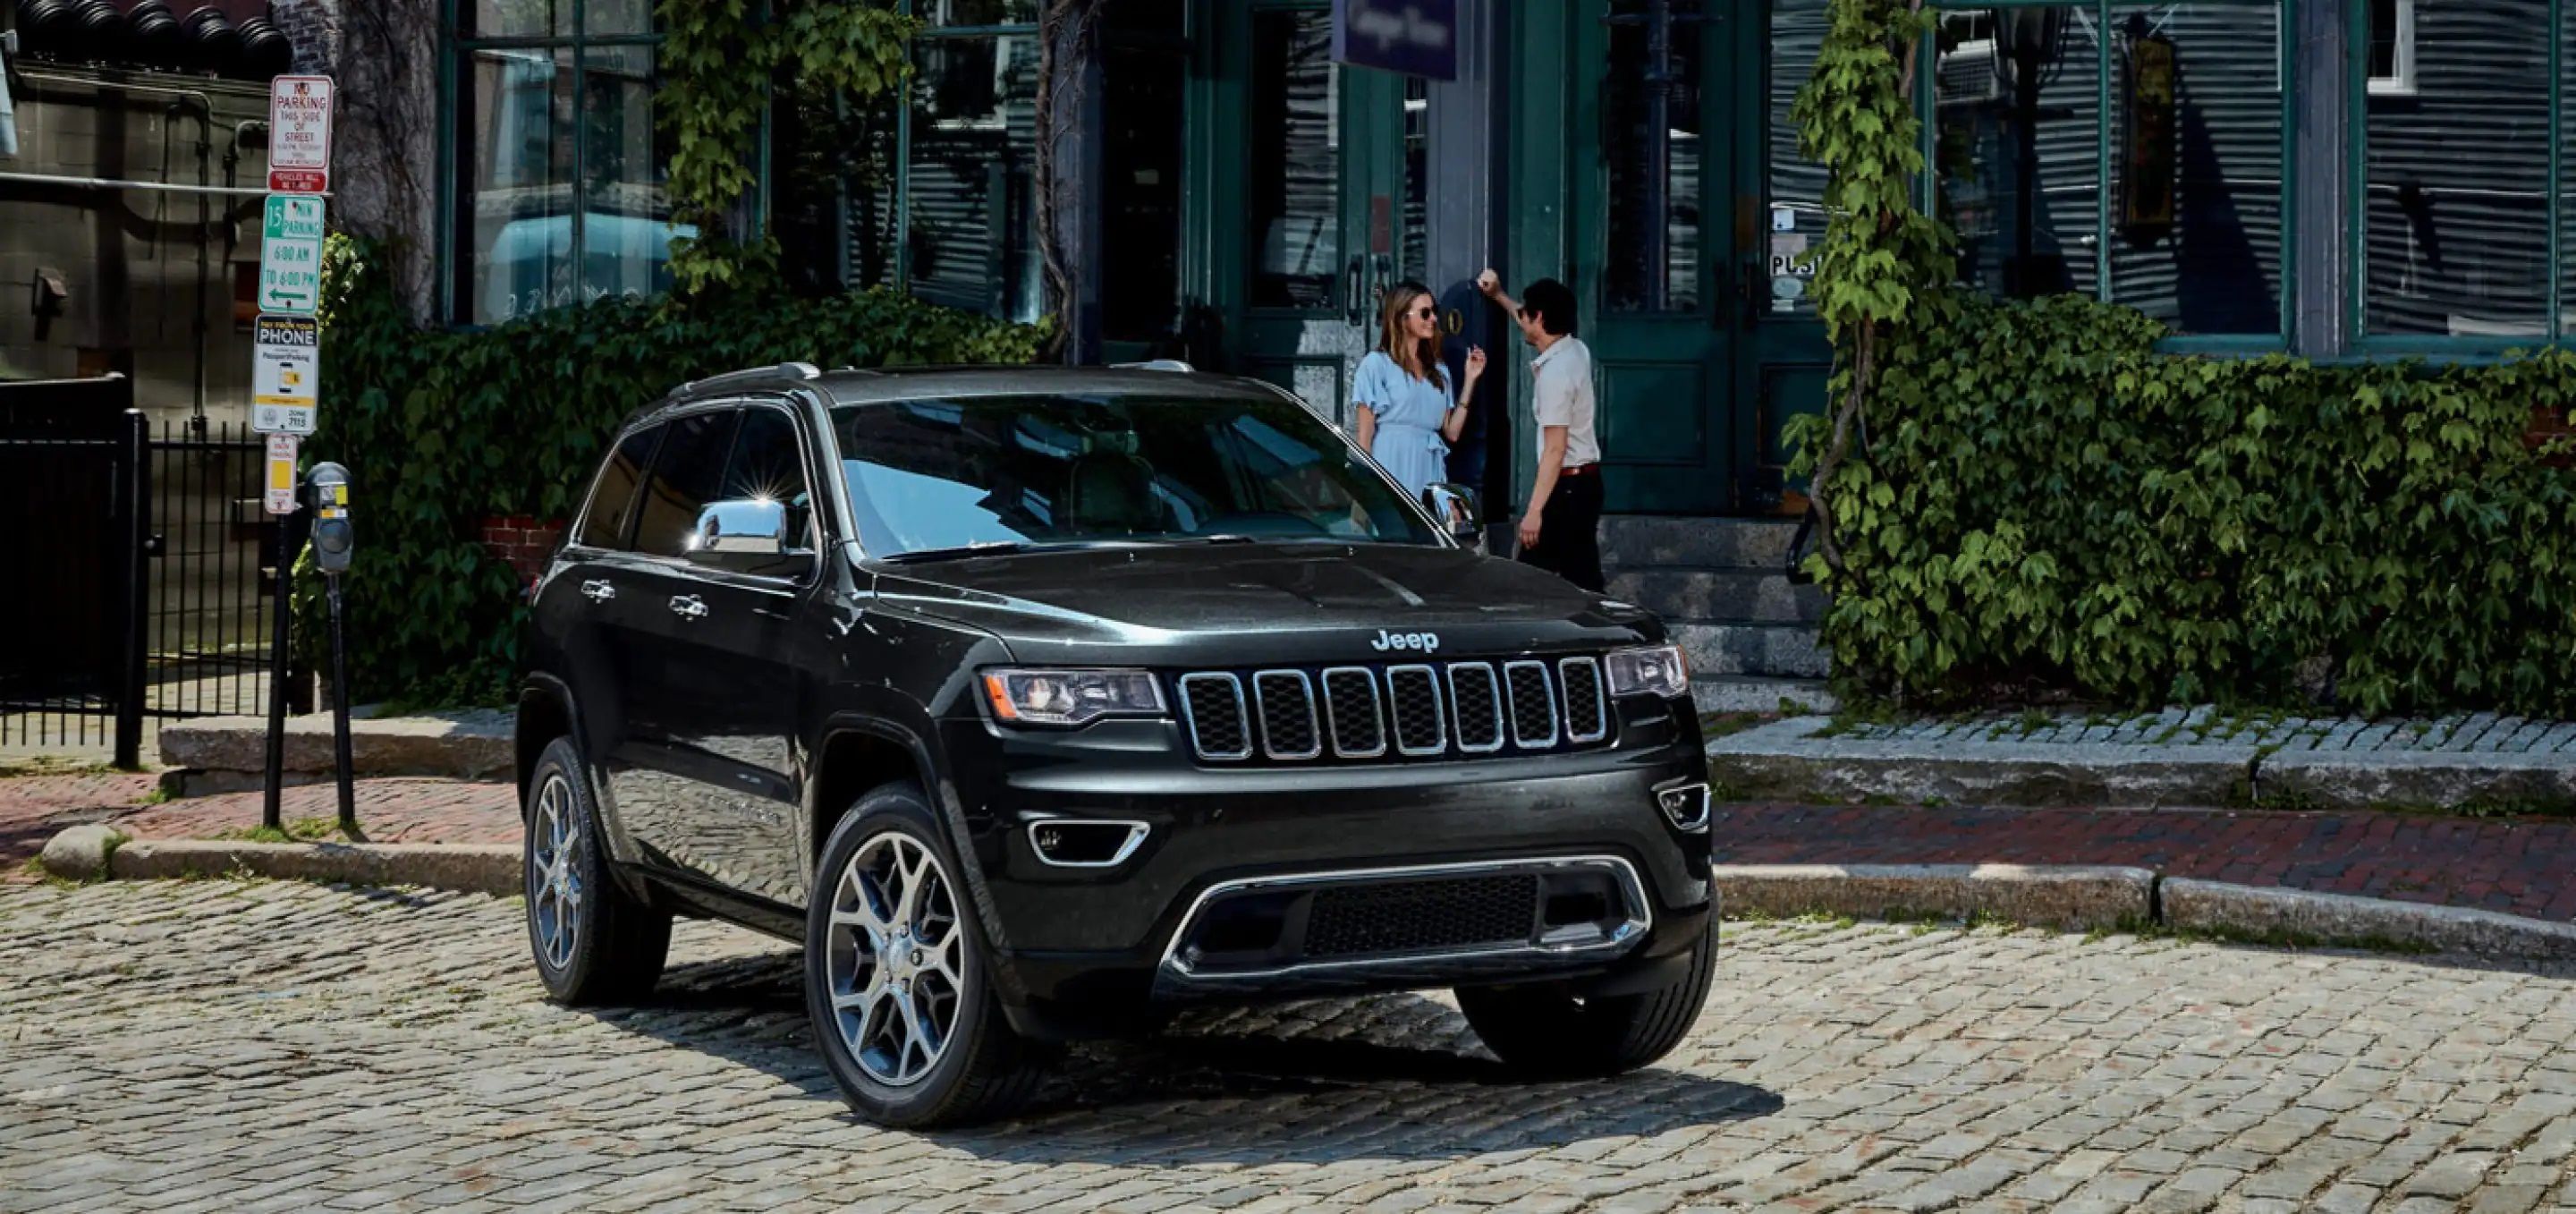 The 2022 Jeep Grand Cherokee WK on the street.